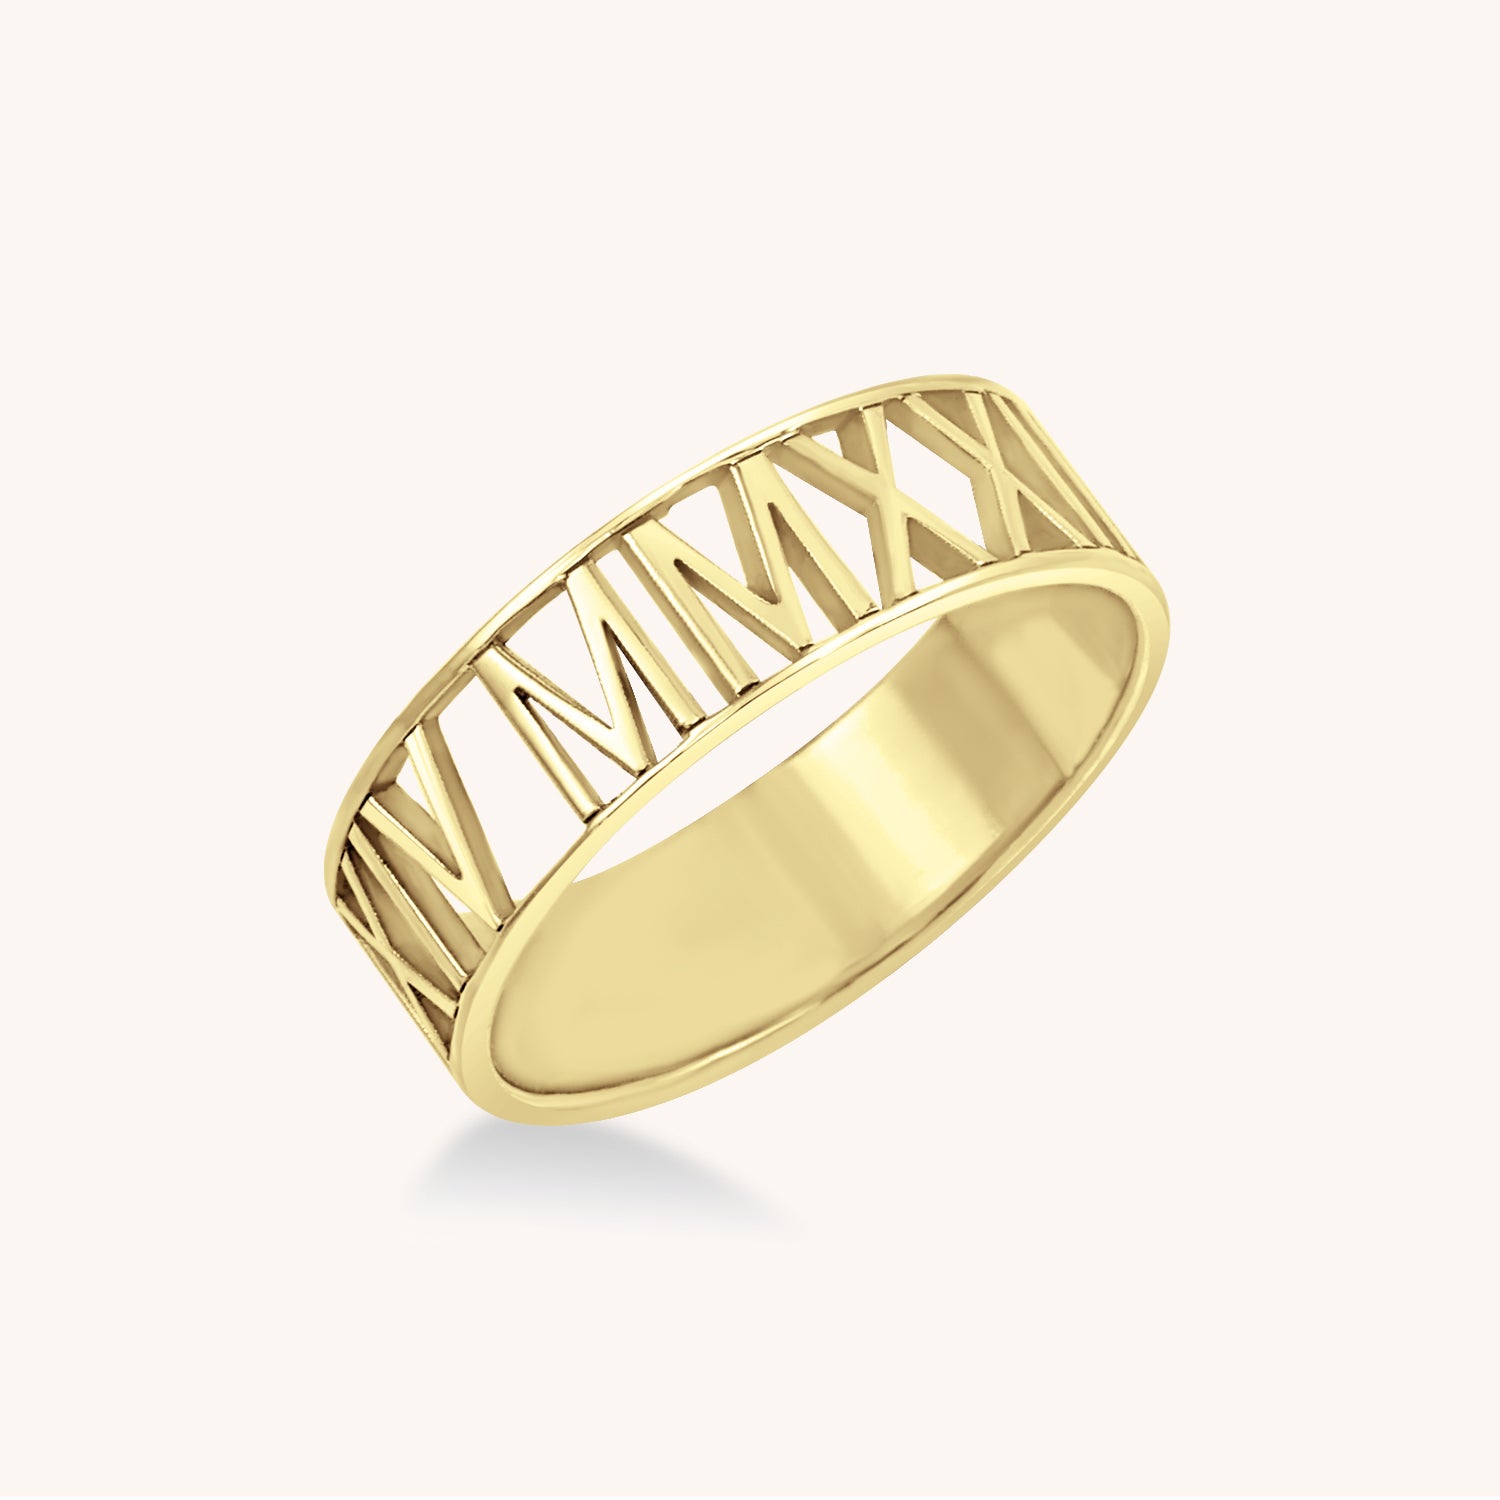 Roman Numerals Date Ring in LDS Inspirational Rings on LDSBookstore.com